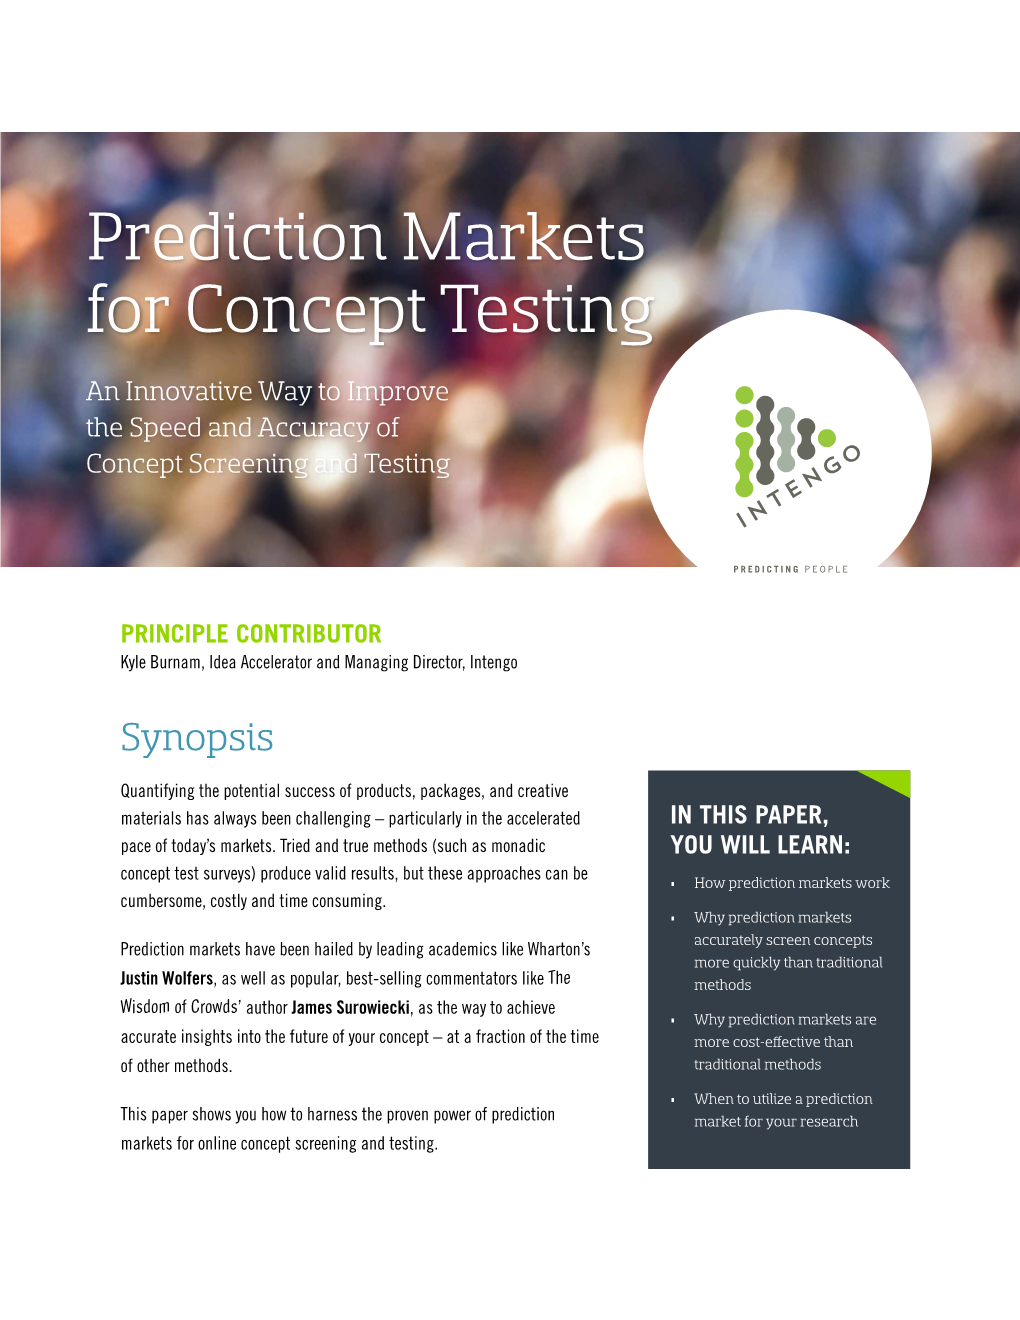 Prediction Markets for Concept Testing an Innovative Way to Improve the Speed and Accuracy of Concept Screening and Testing